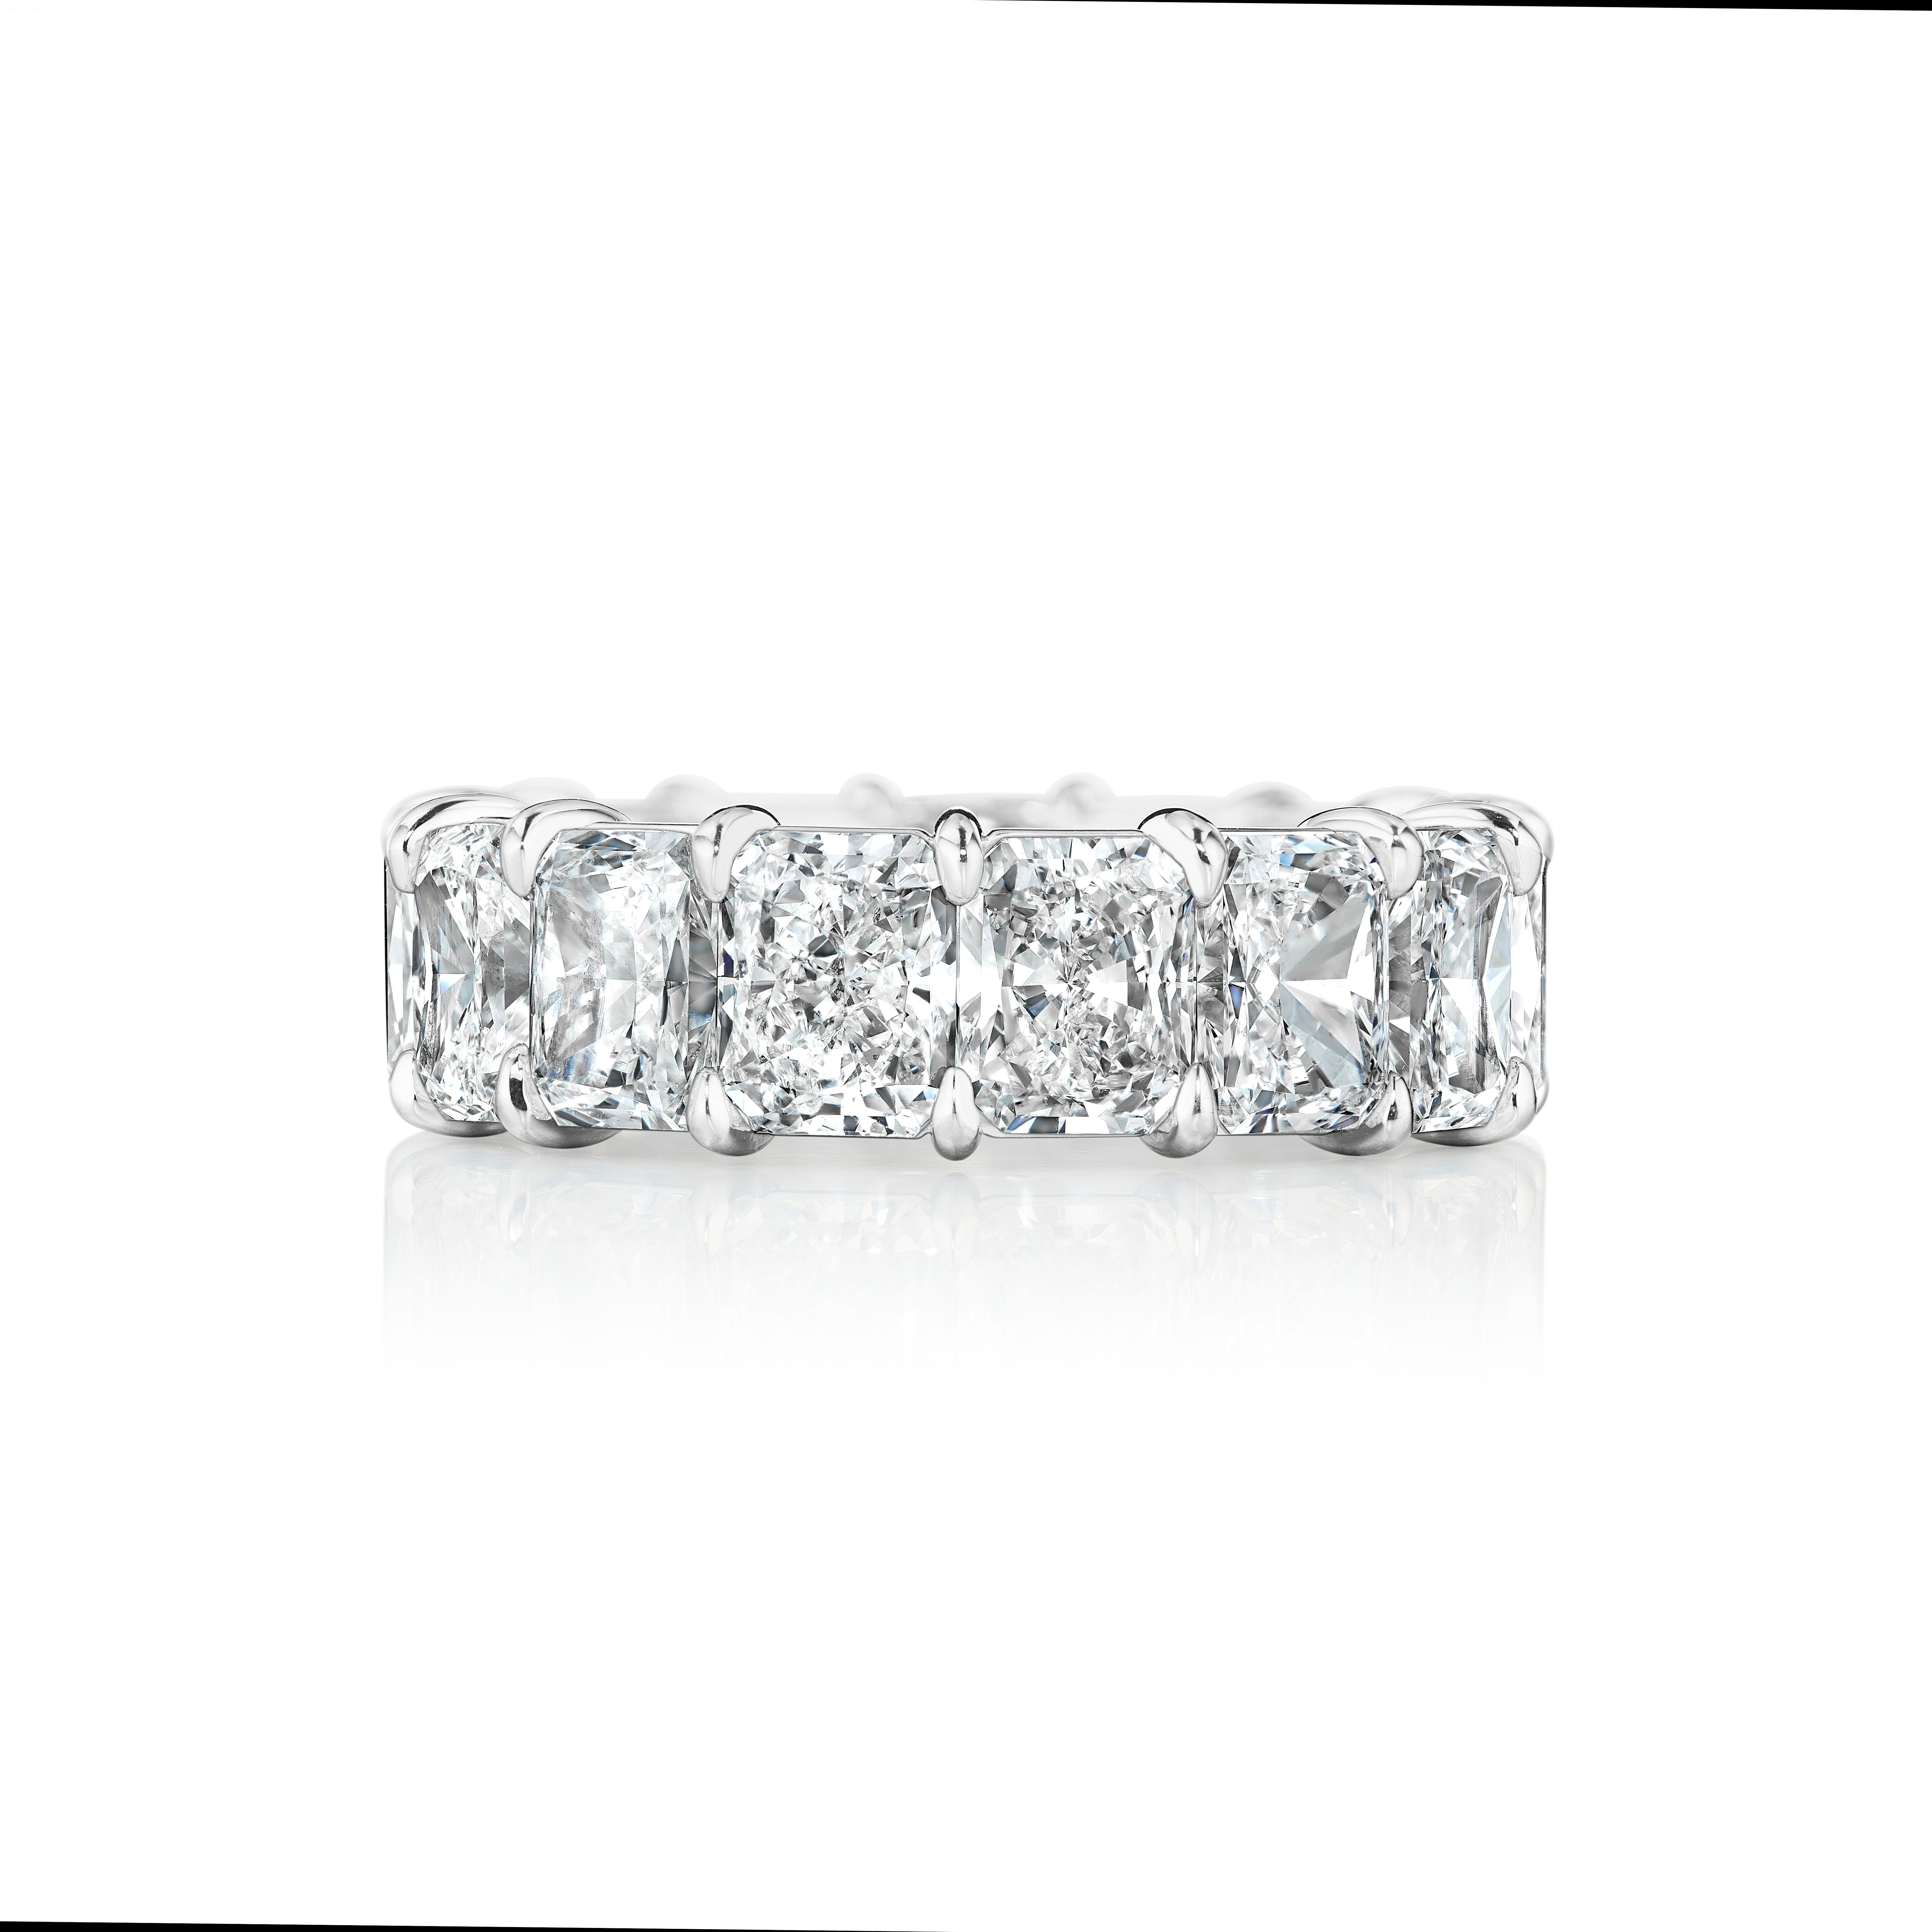 The Ultimate Emerald Cut Eternity Band.
14 Perfectly Matched Emerald Cuts each weighing over 0.90 Carat for 12.90 Carats in Total.
D-F Color and VS2-SI2 Clarity.
Set in a Platinum Handmade Classic Setting.
Set with elongated stones.
Size 6